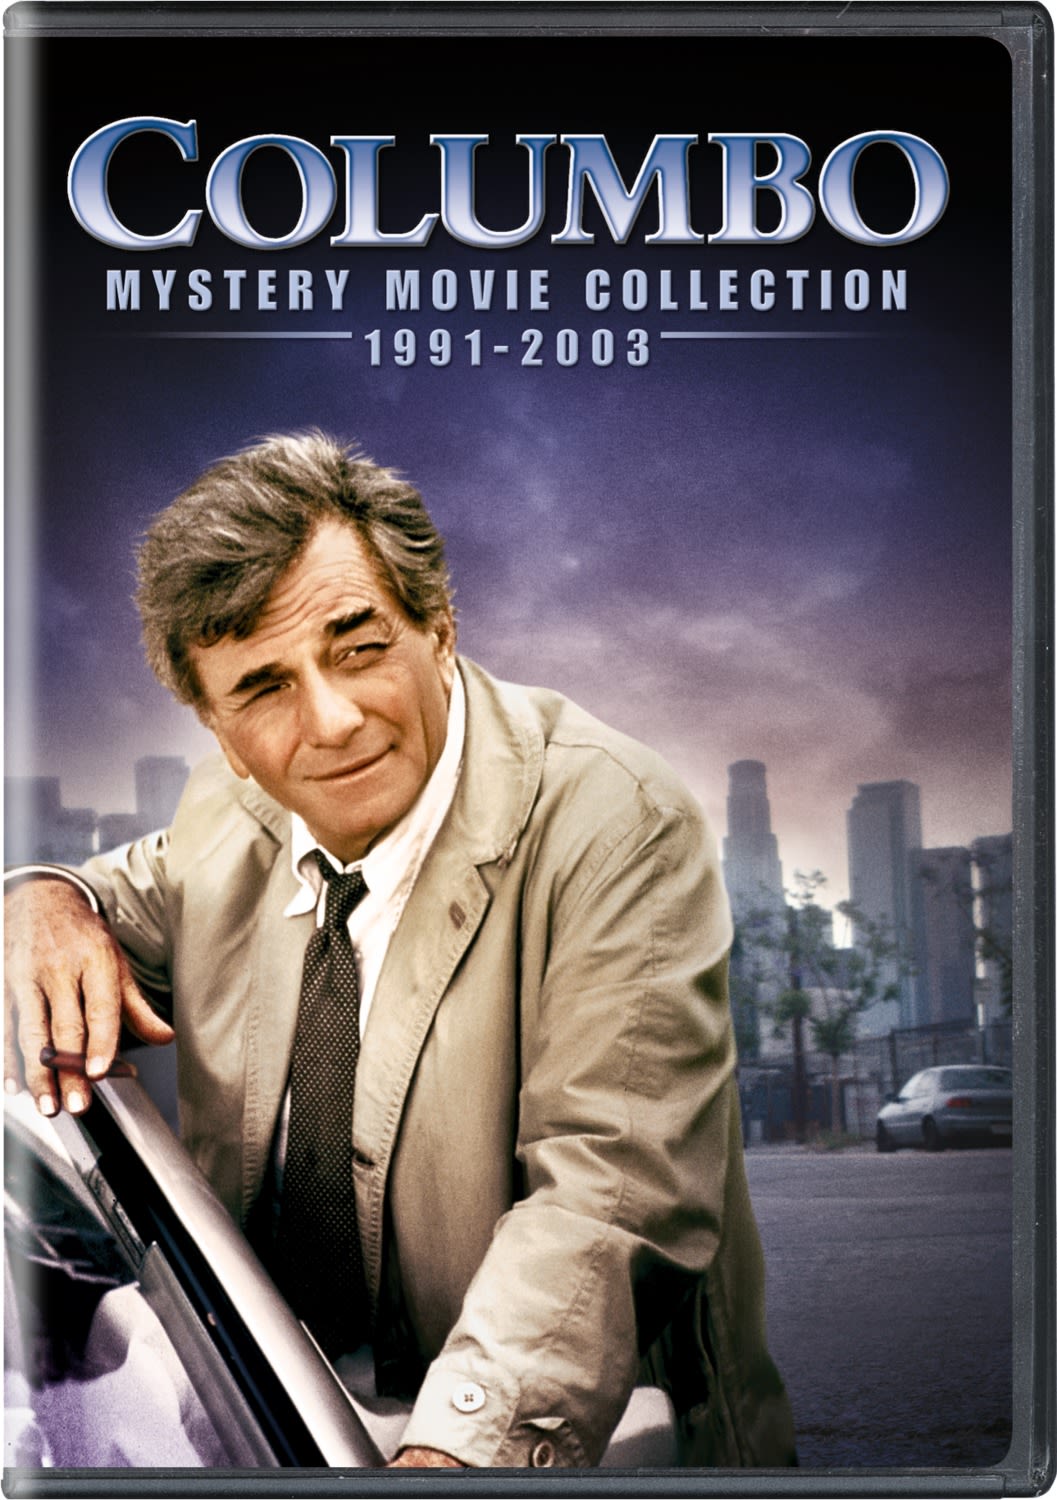 Columbo: Mystery Movie Collection (1991-2003) (DVD) on MovieShack